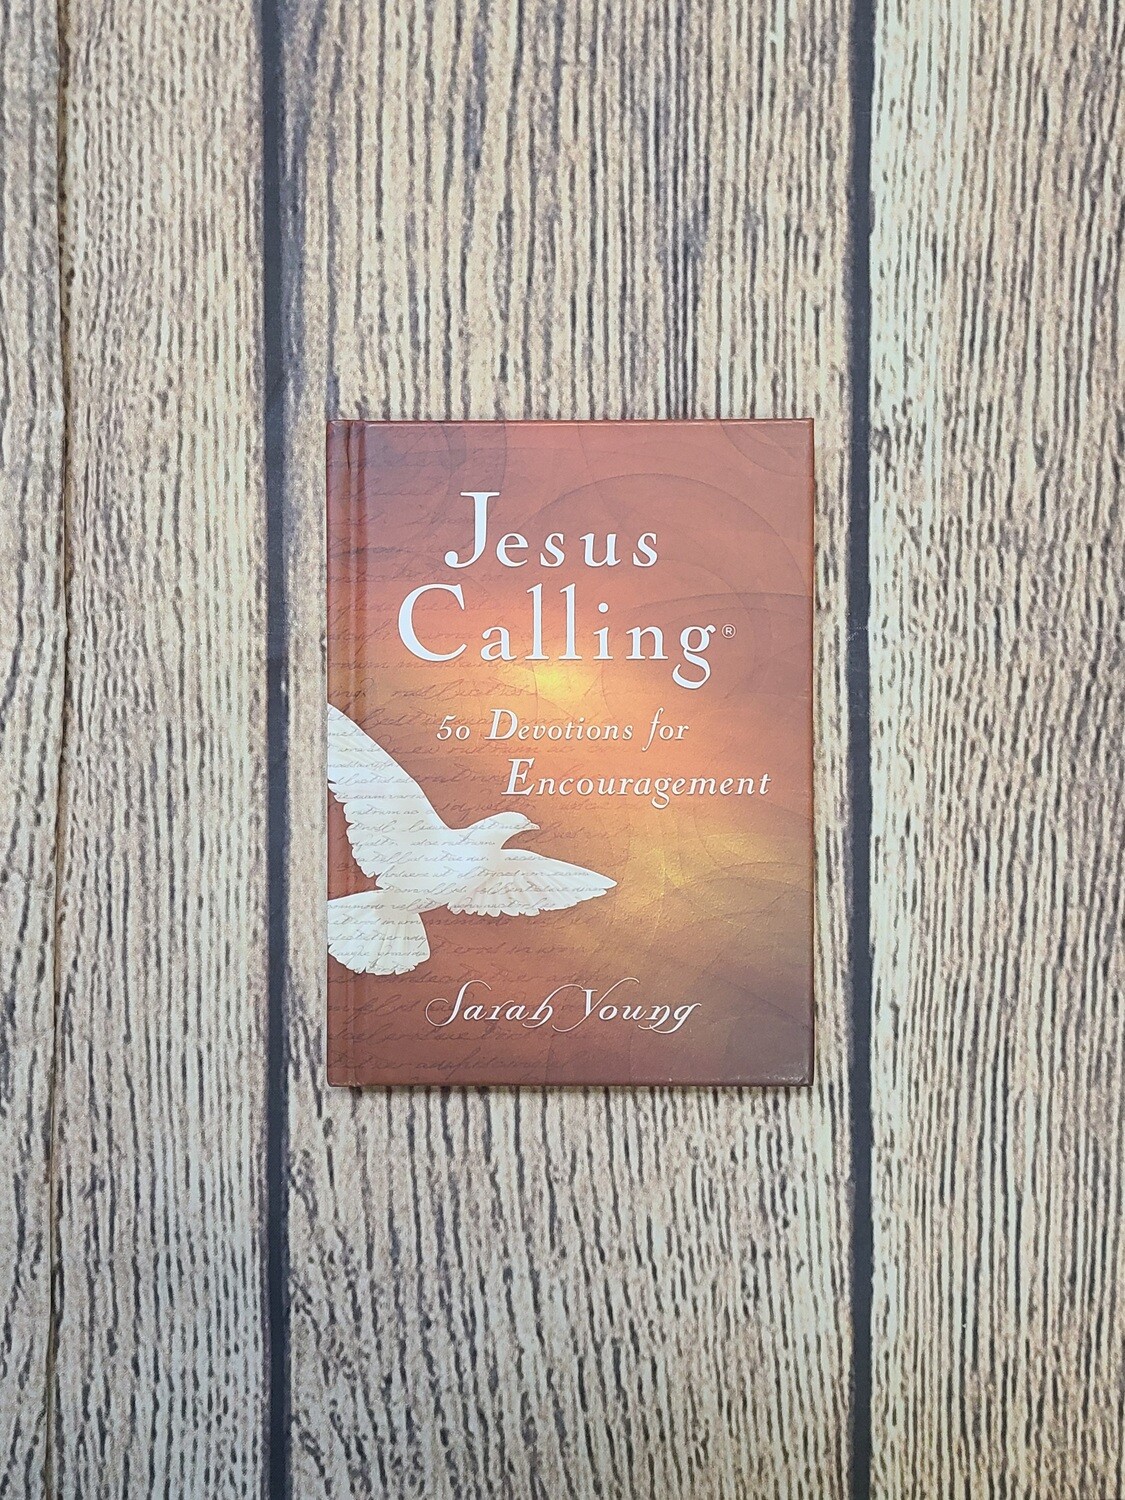 Jesus Calling: 50 Devotions for Encouragement by Sarah Young